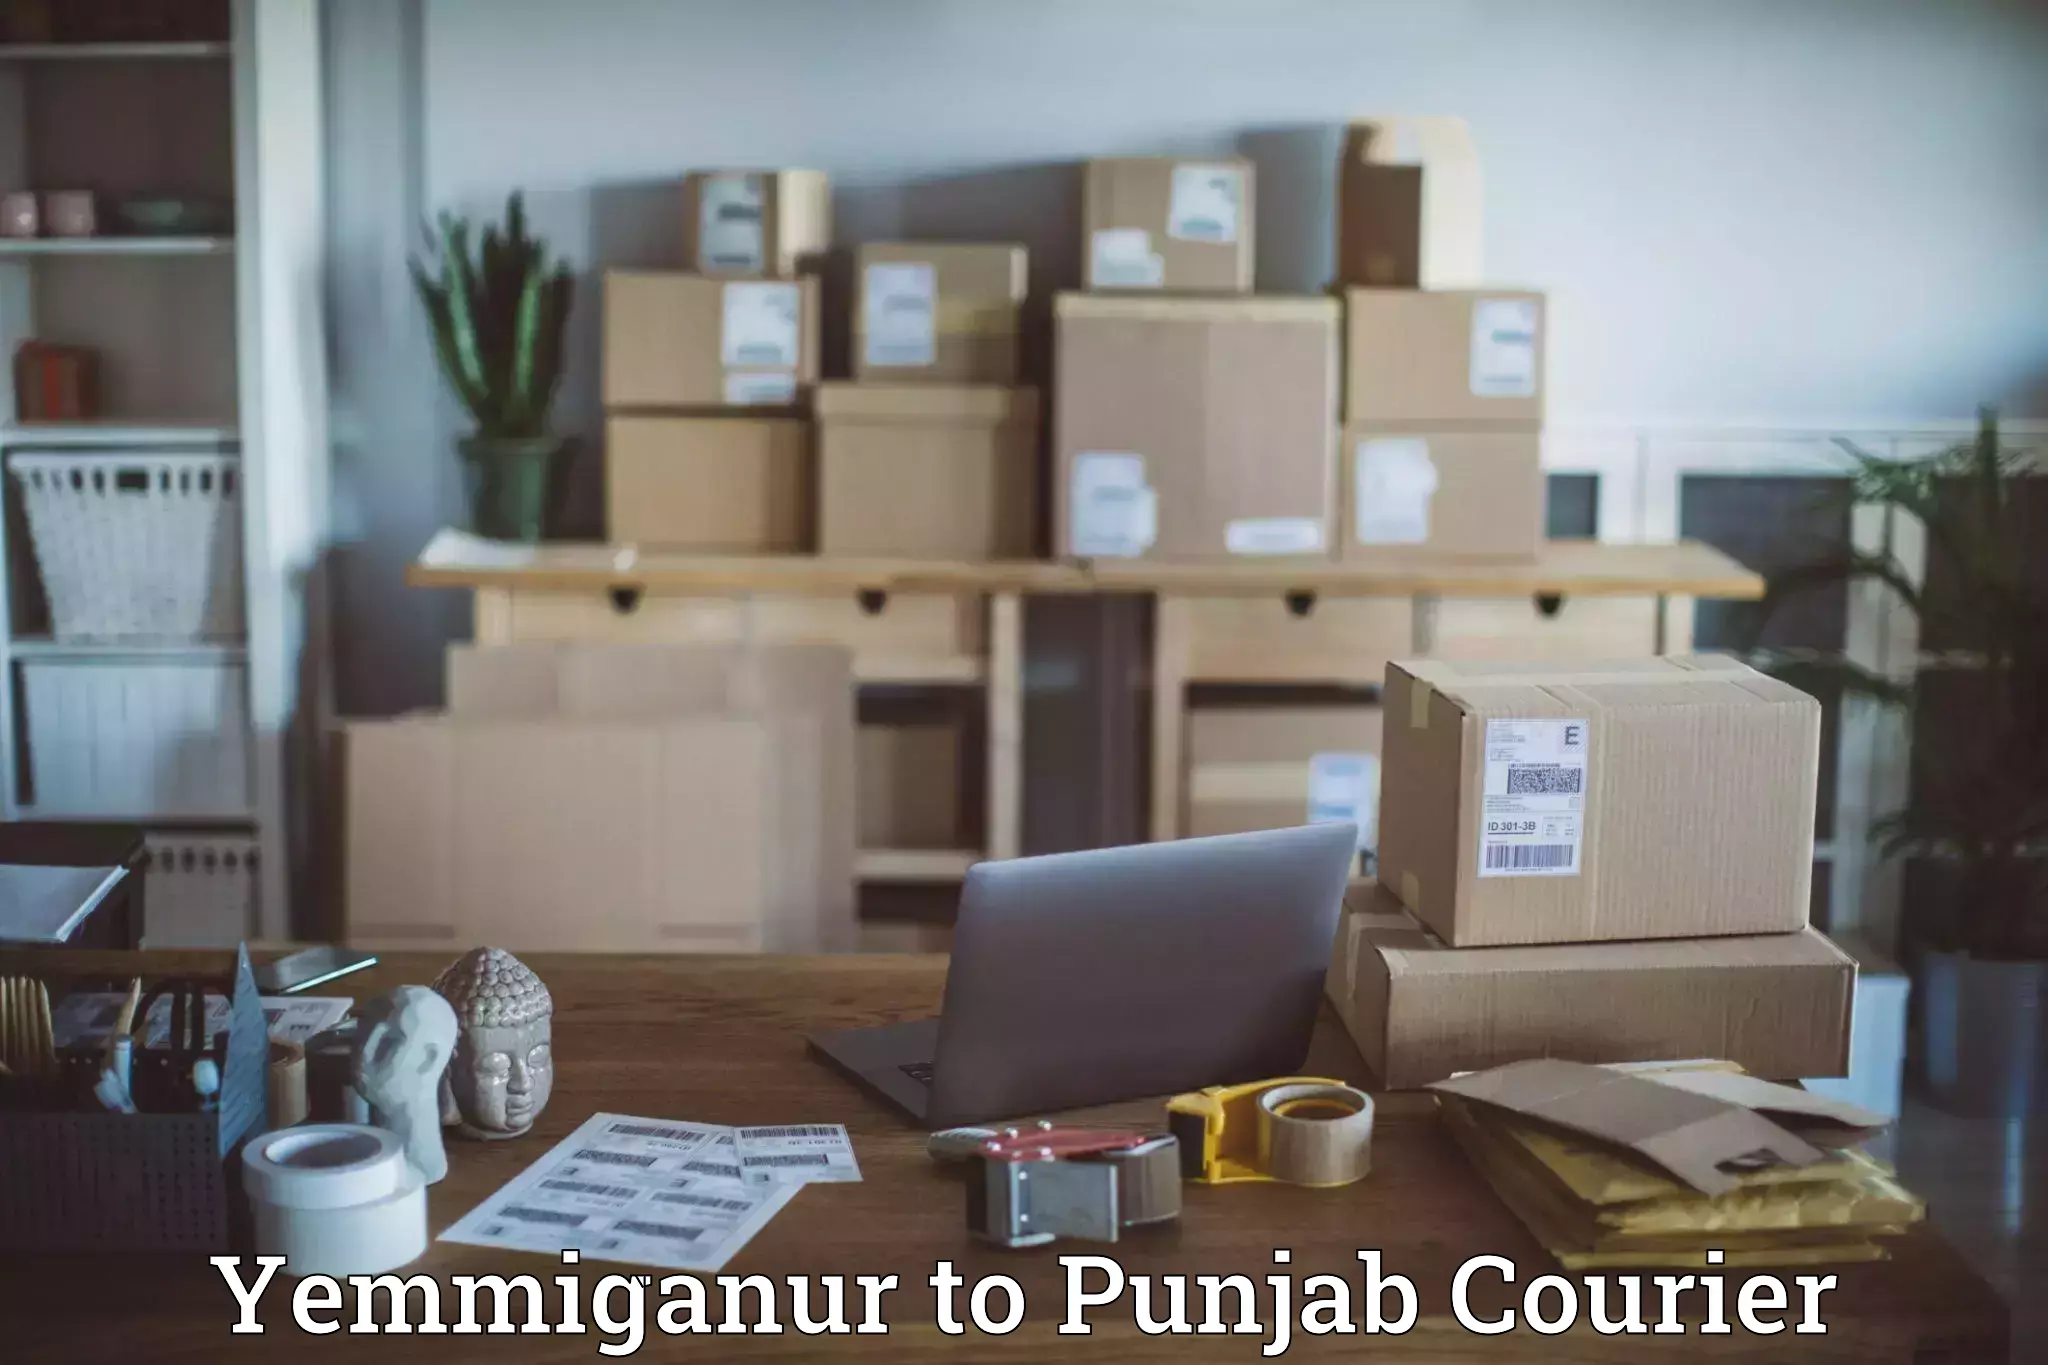 Express delivery capabilities Yemmiganur to Sirhind Fatehgarh